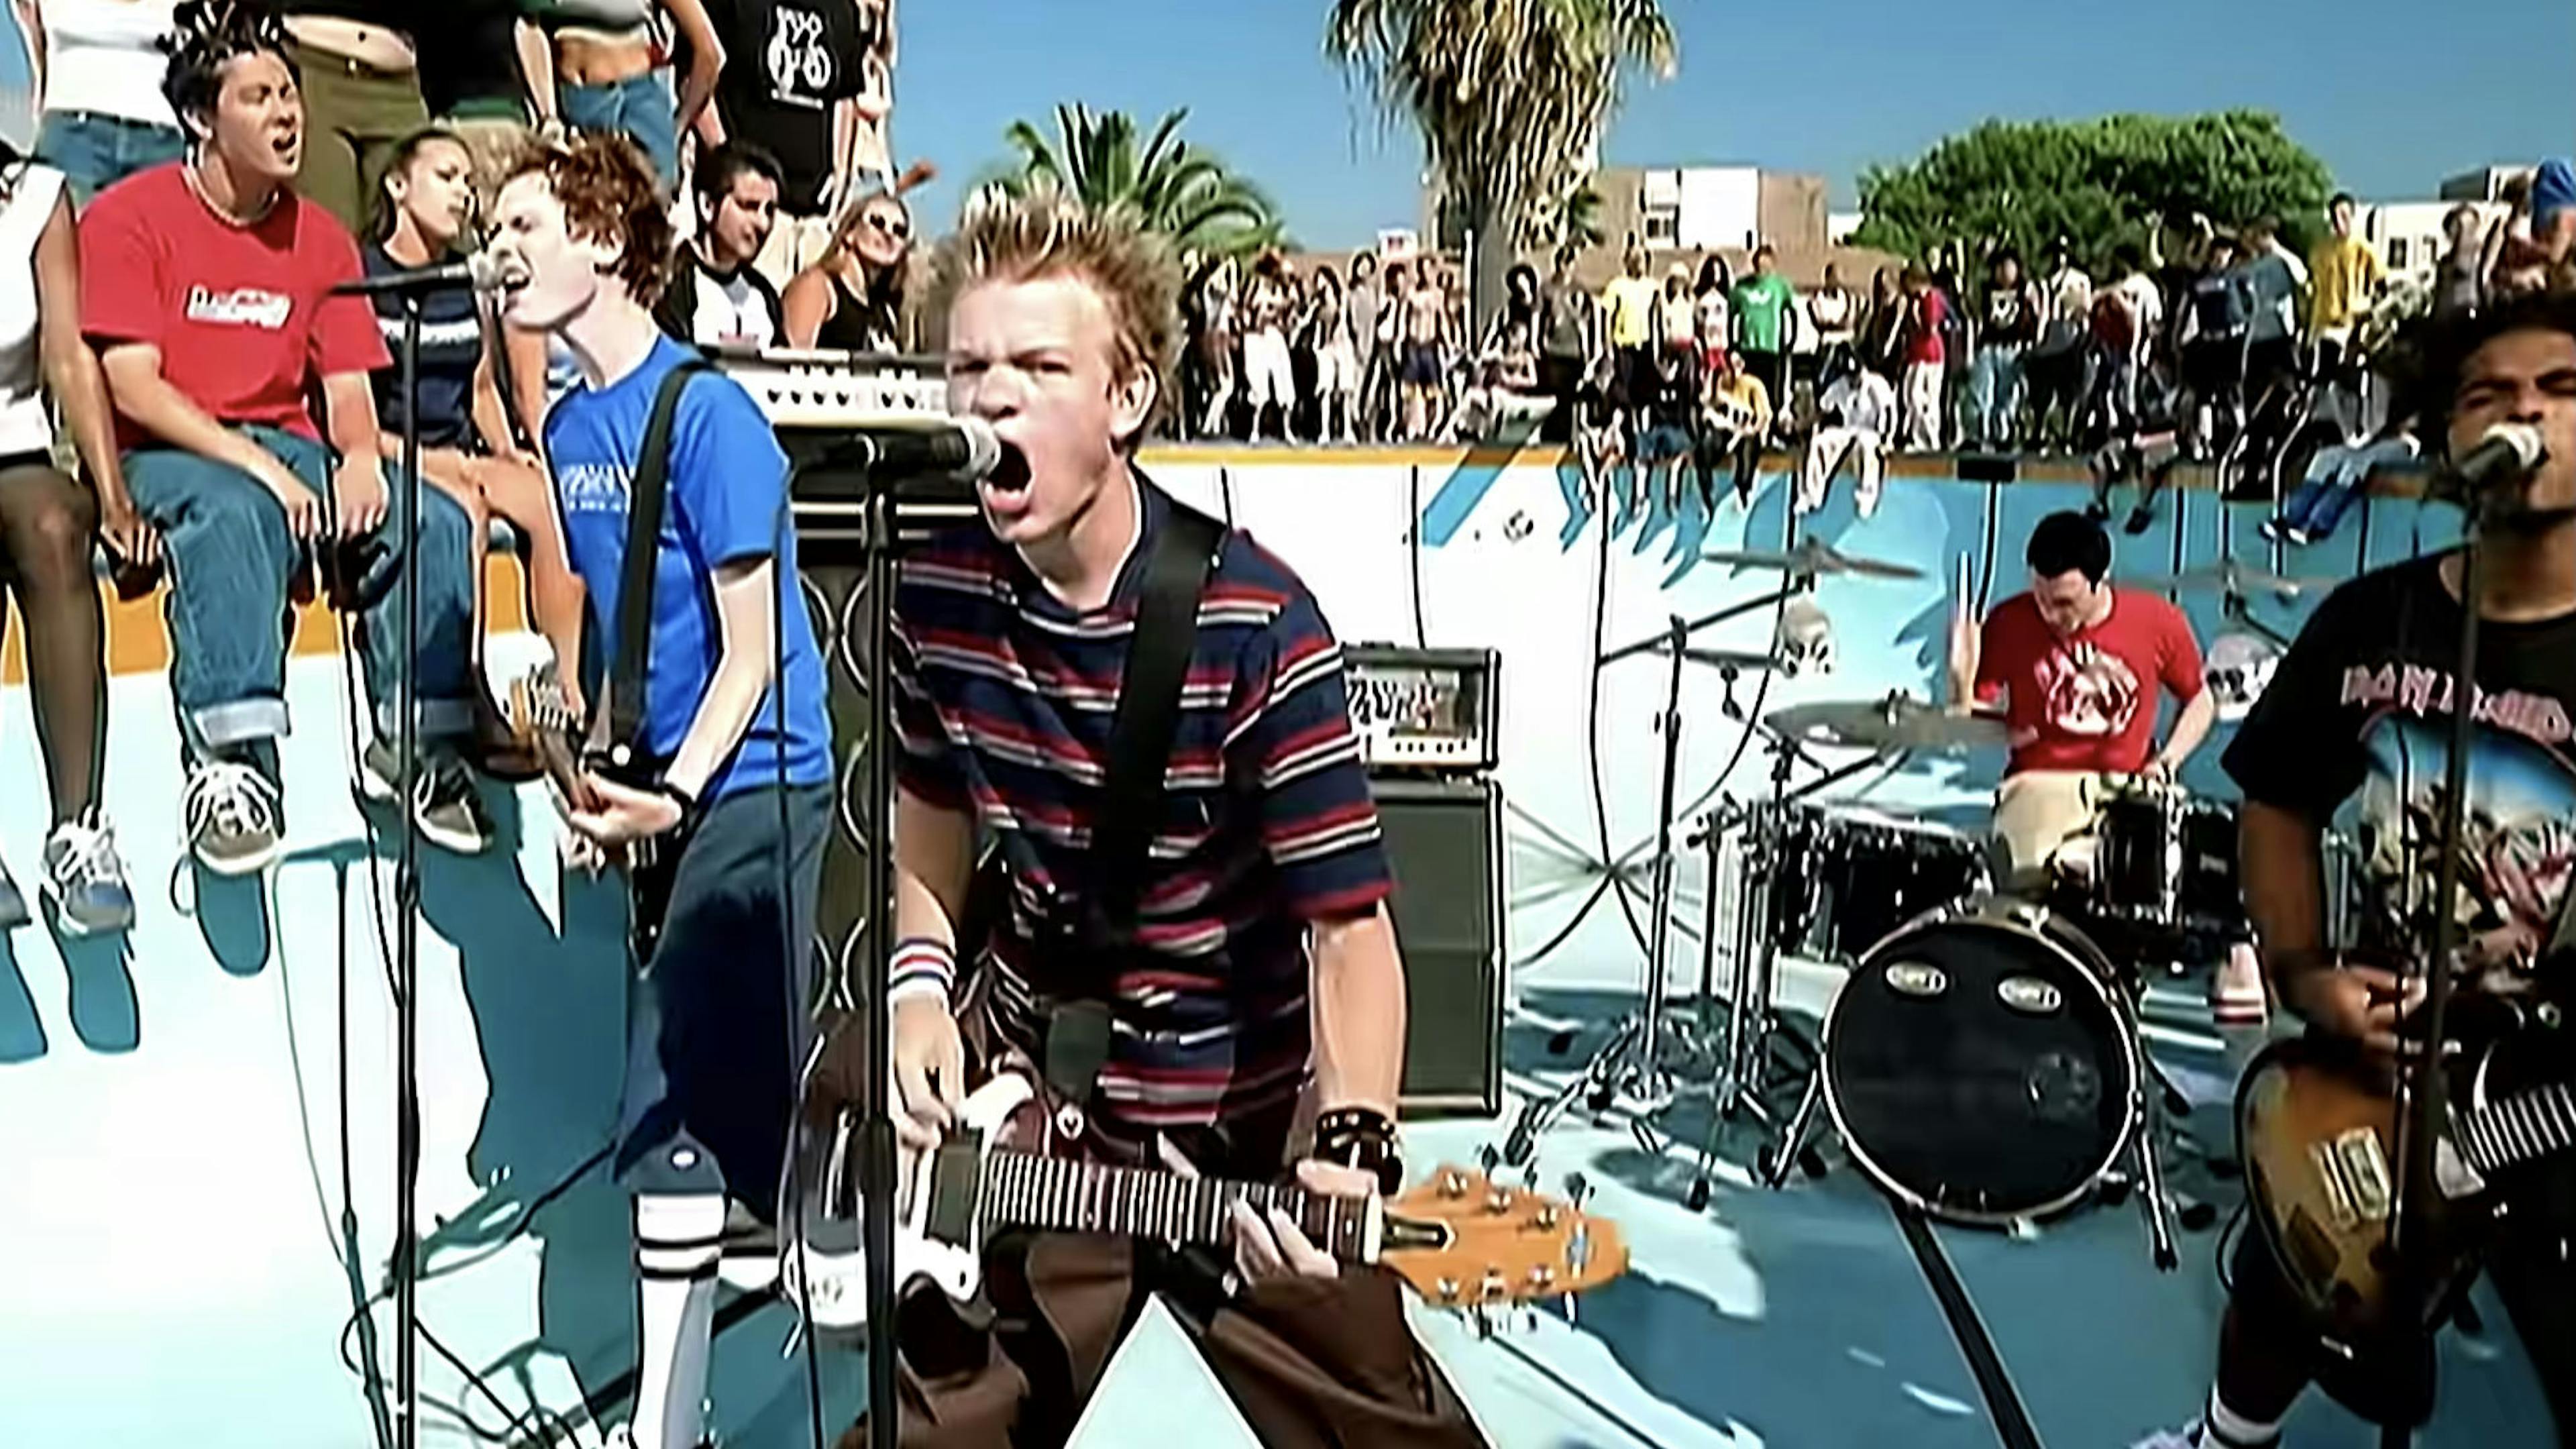 An intense dissection of Sum 41’s In Too Deep video